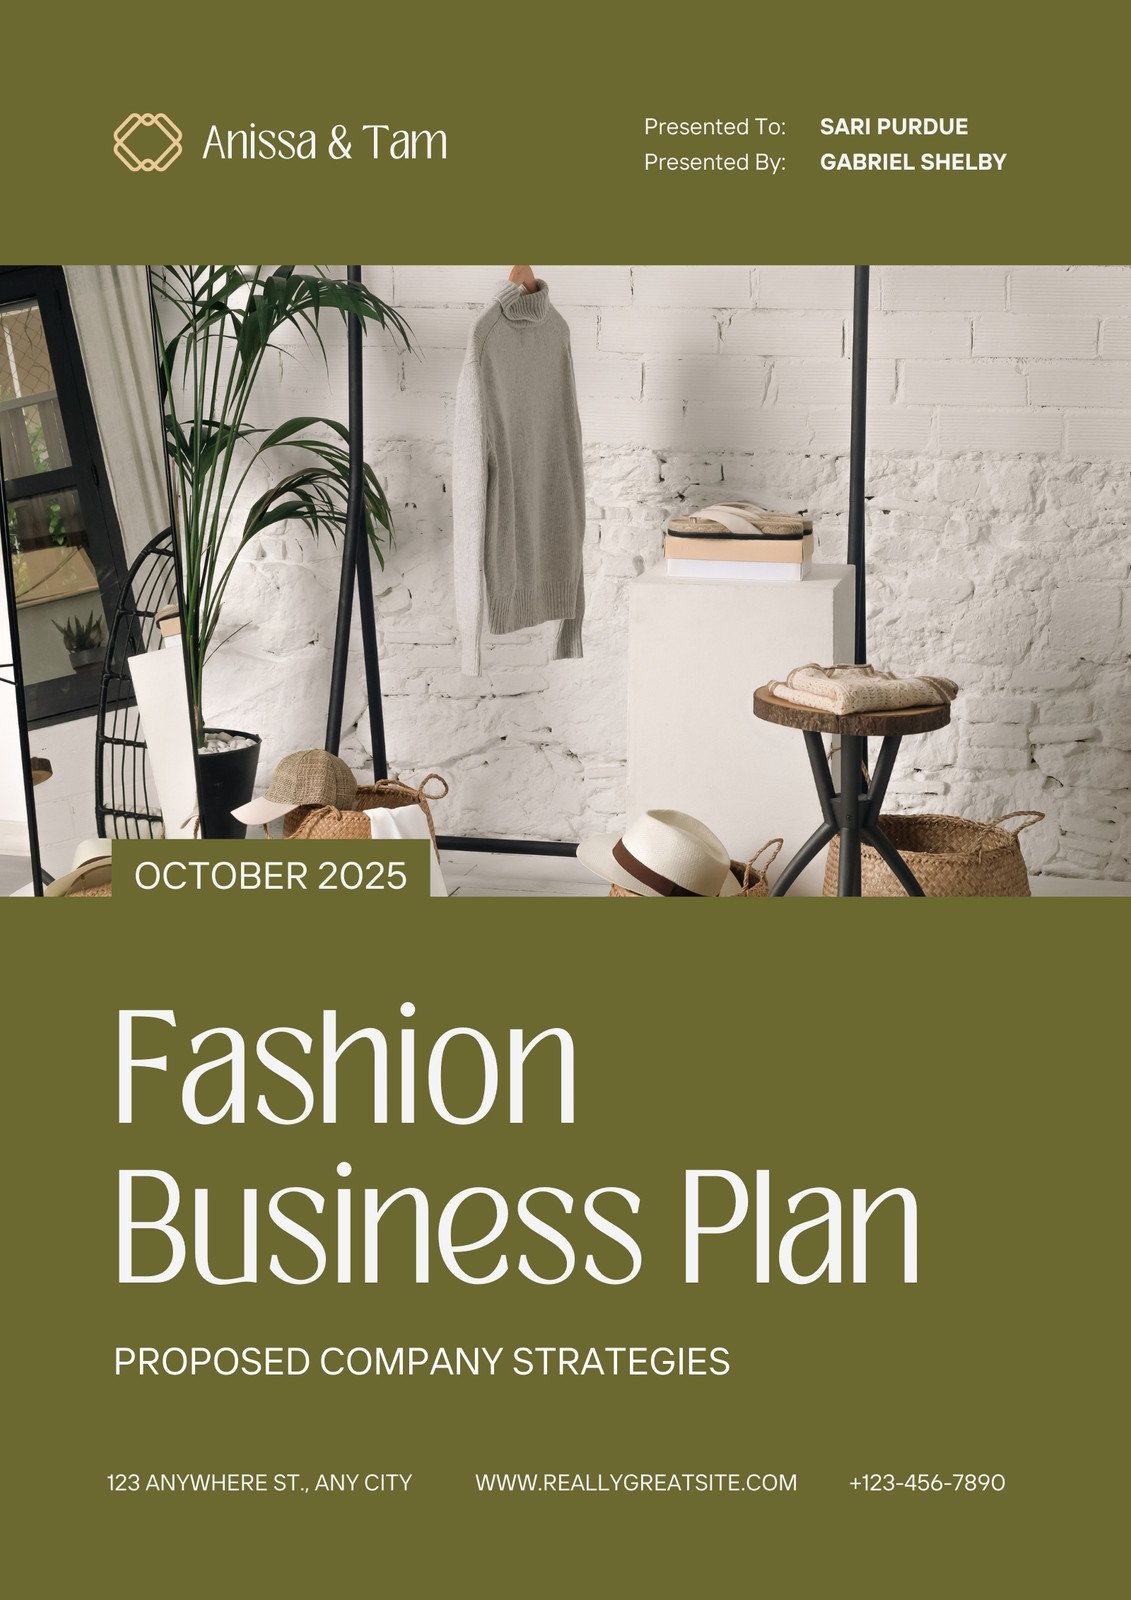 Clothing Business Plan Template Awesome A Sample Fashion for Business Plan  Templat…